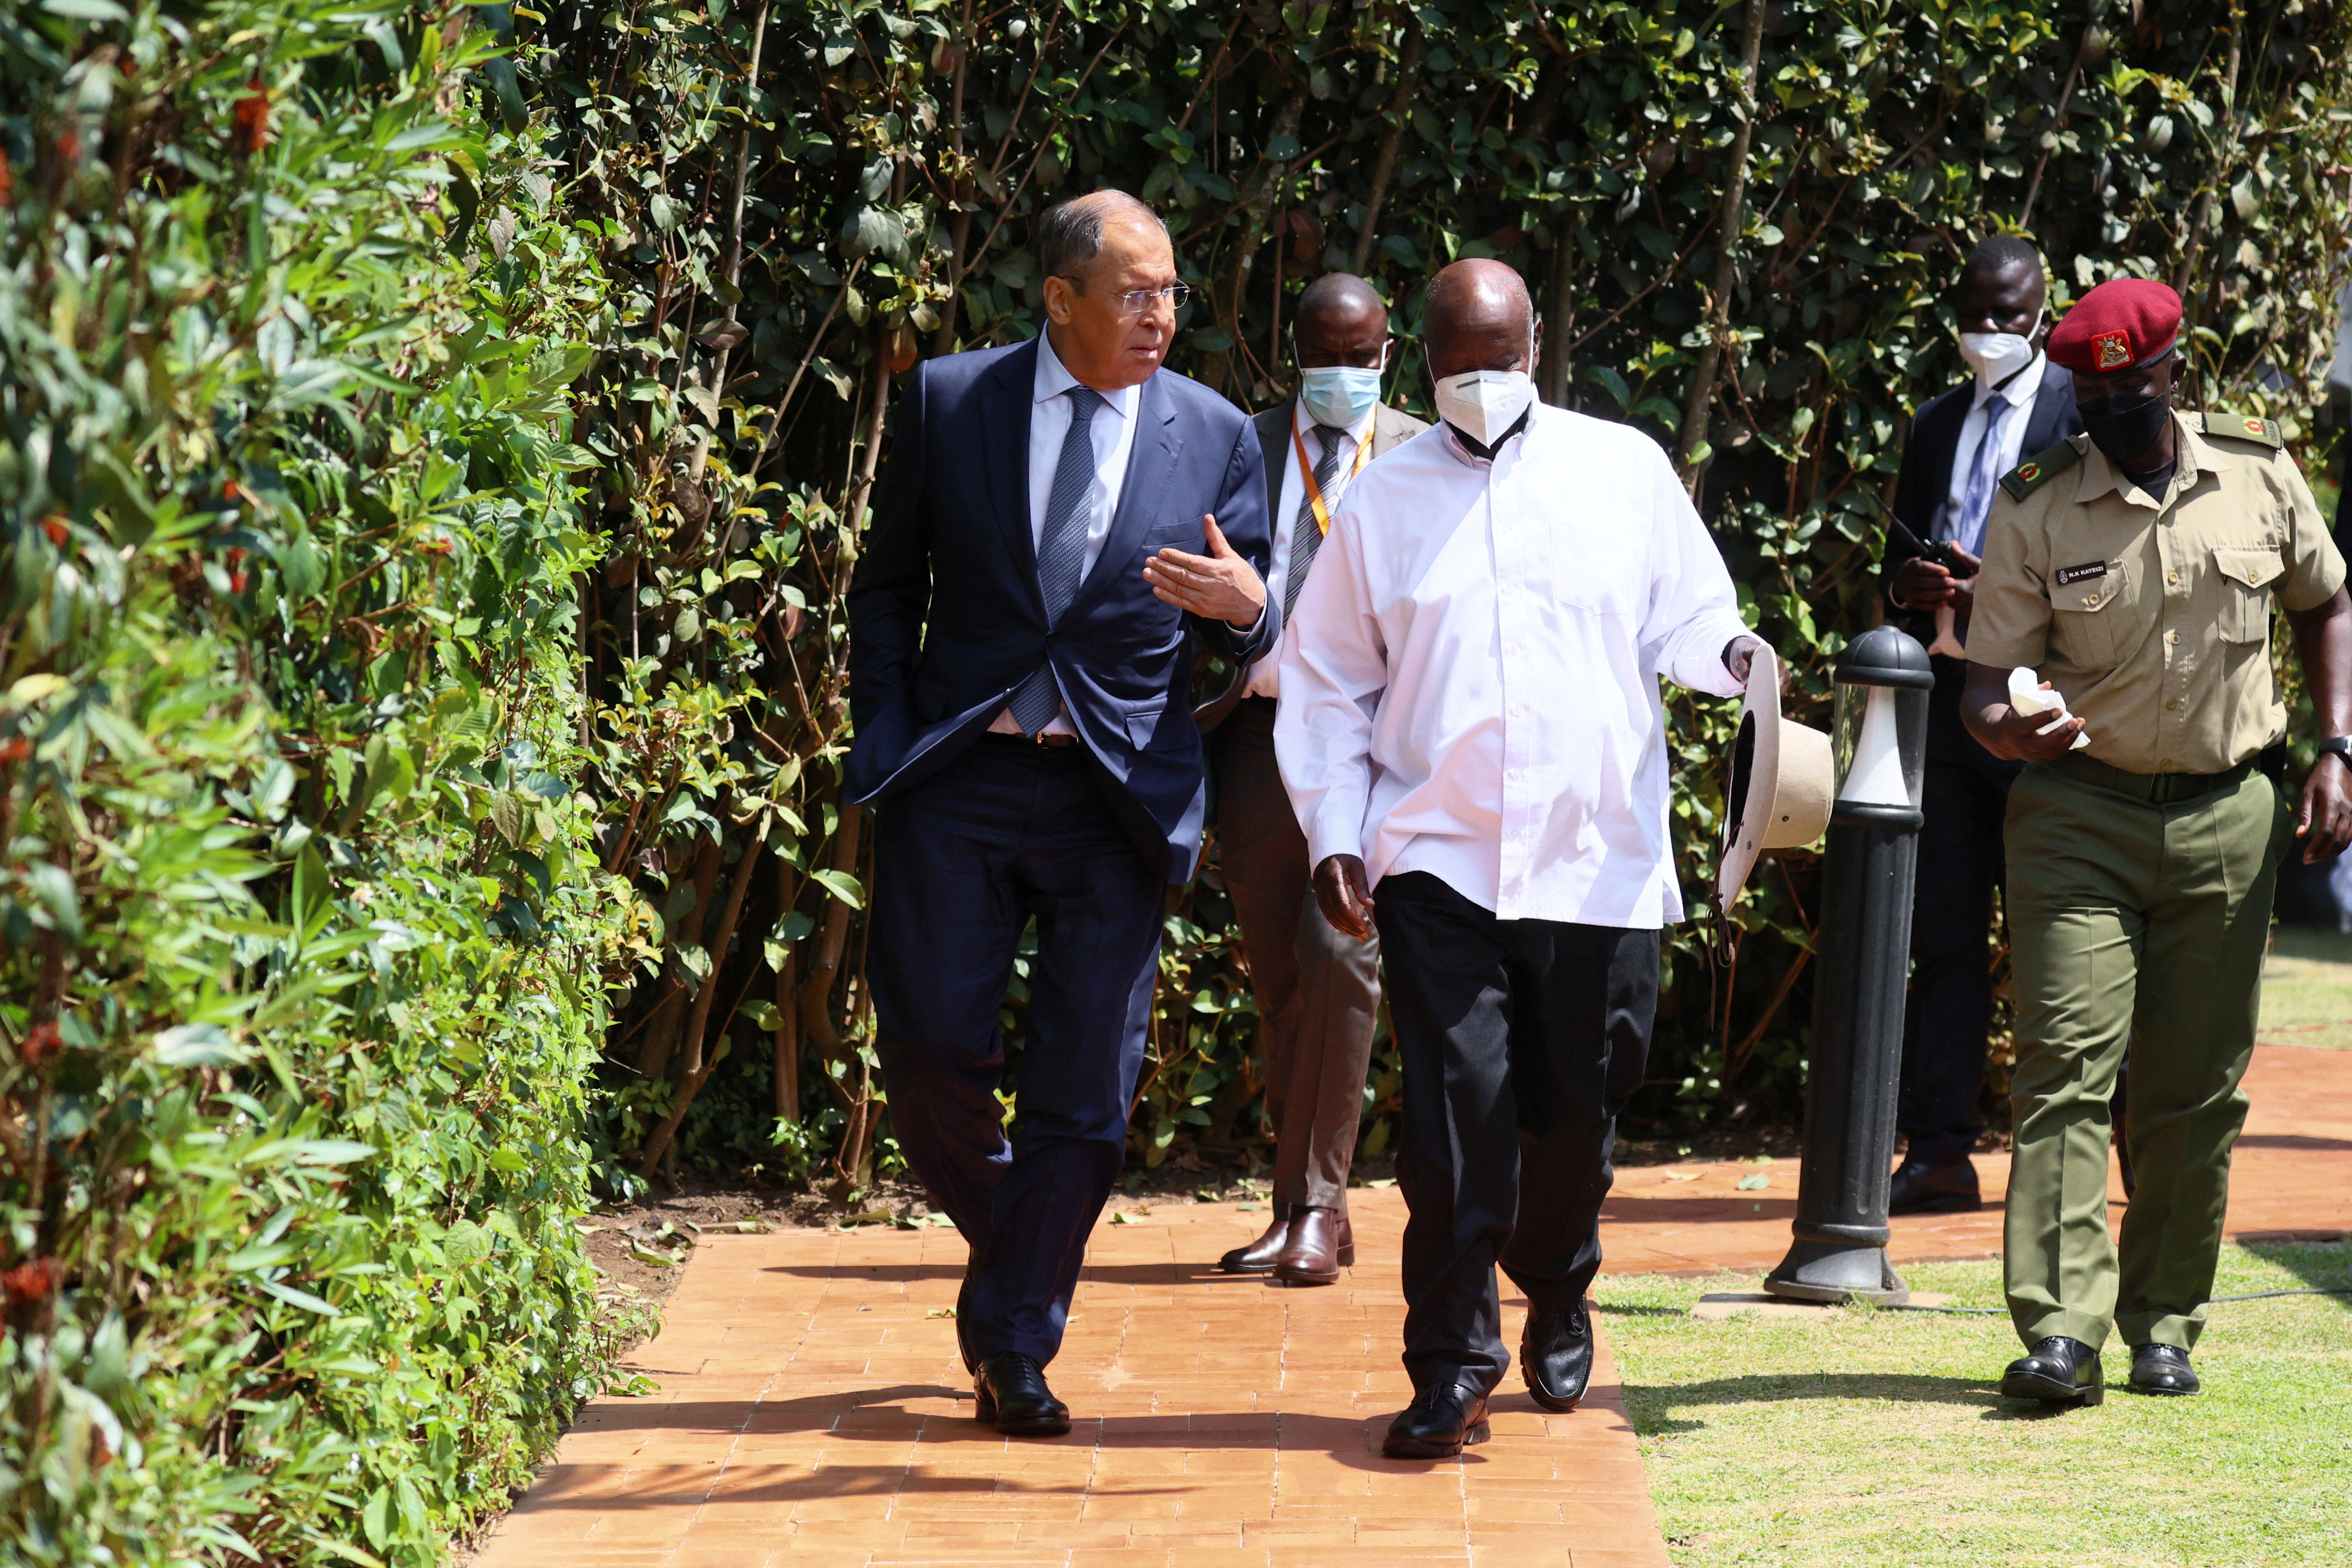 Ugandan President Yoweri Museveni (R) hosted Russian Foreign Minsiter Sergey Lavrov yesterday. He said, “if Russia makes mistakes, we tell them. When they have not made mistakes, we can’t be against them.”